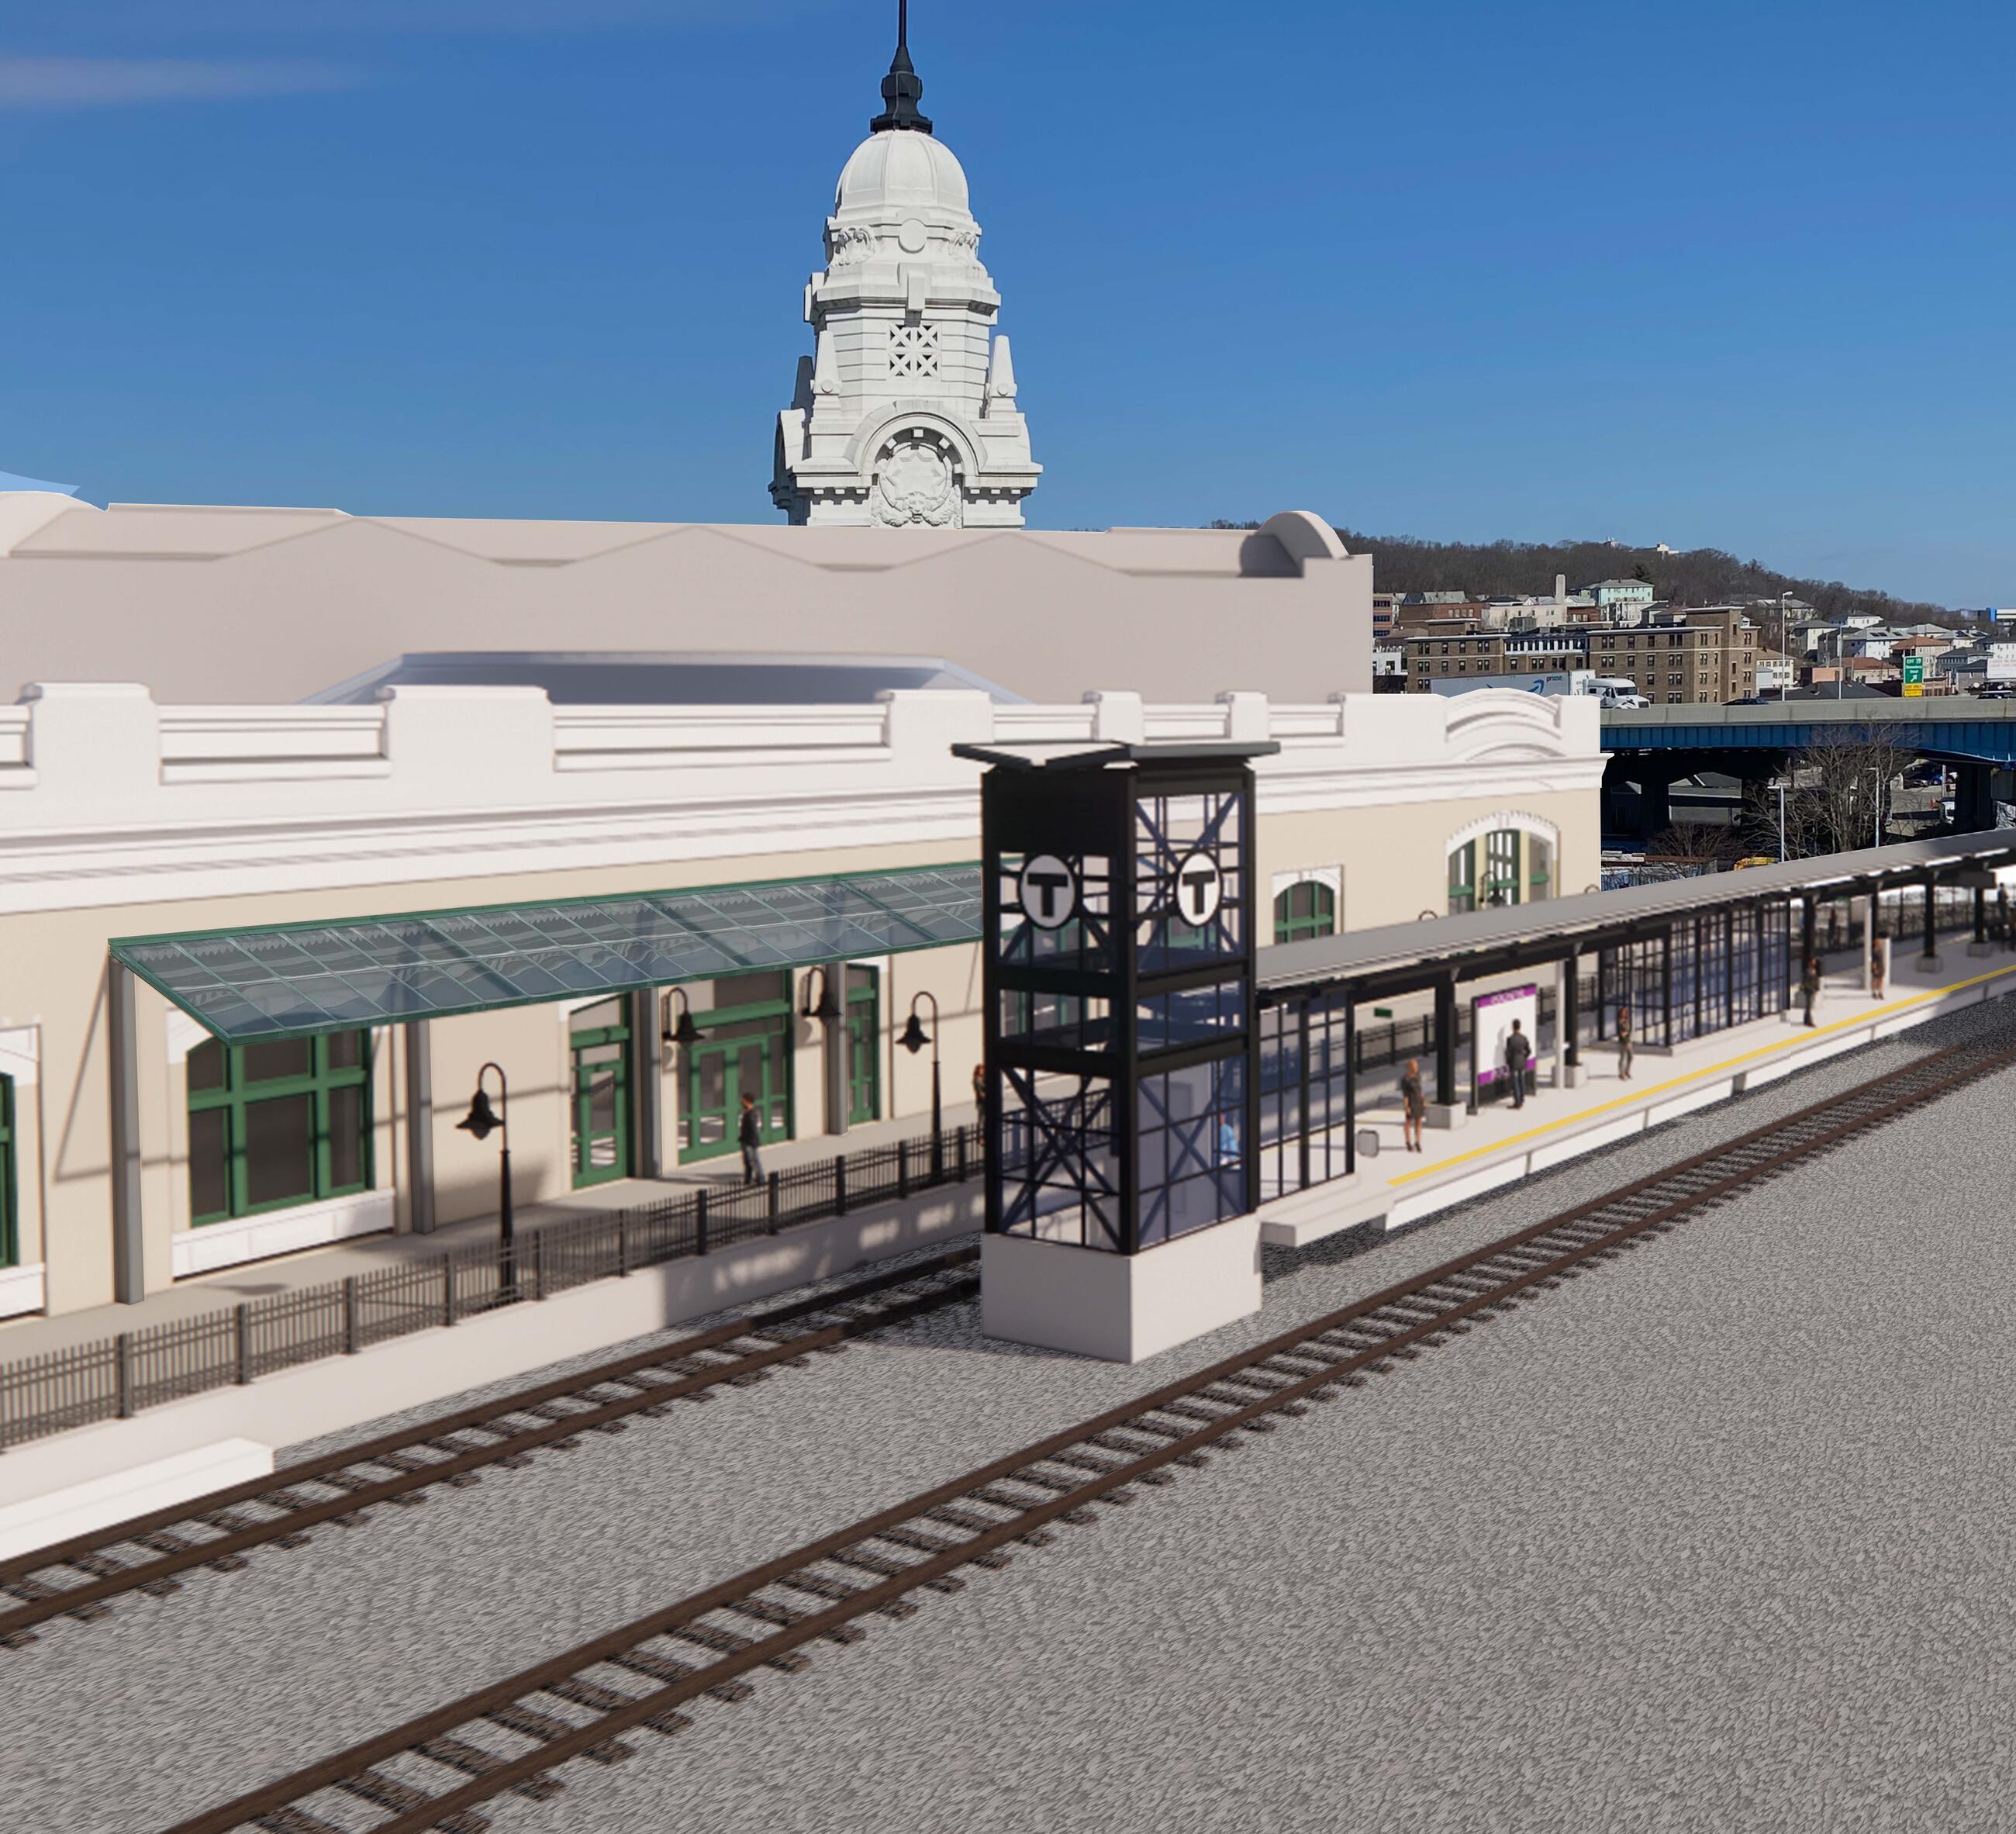 Rendering of the external plaza of the station